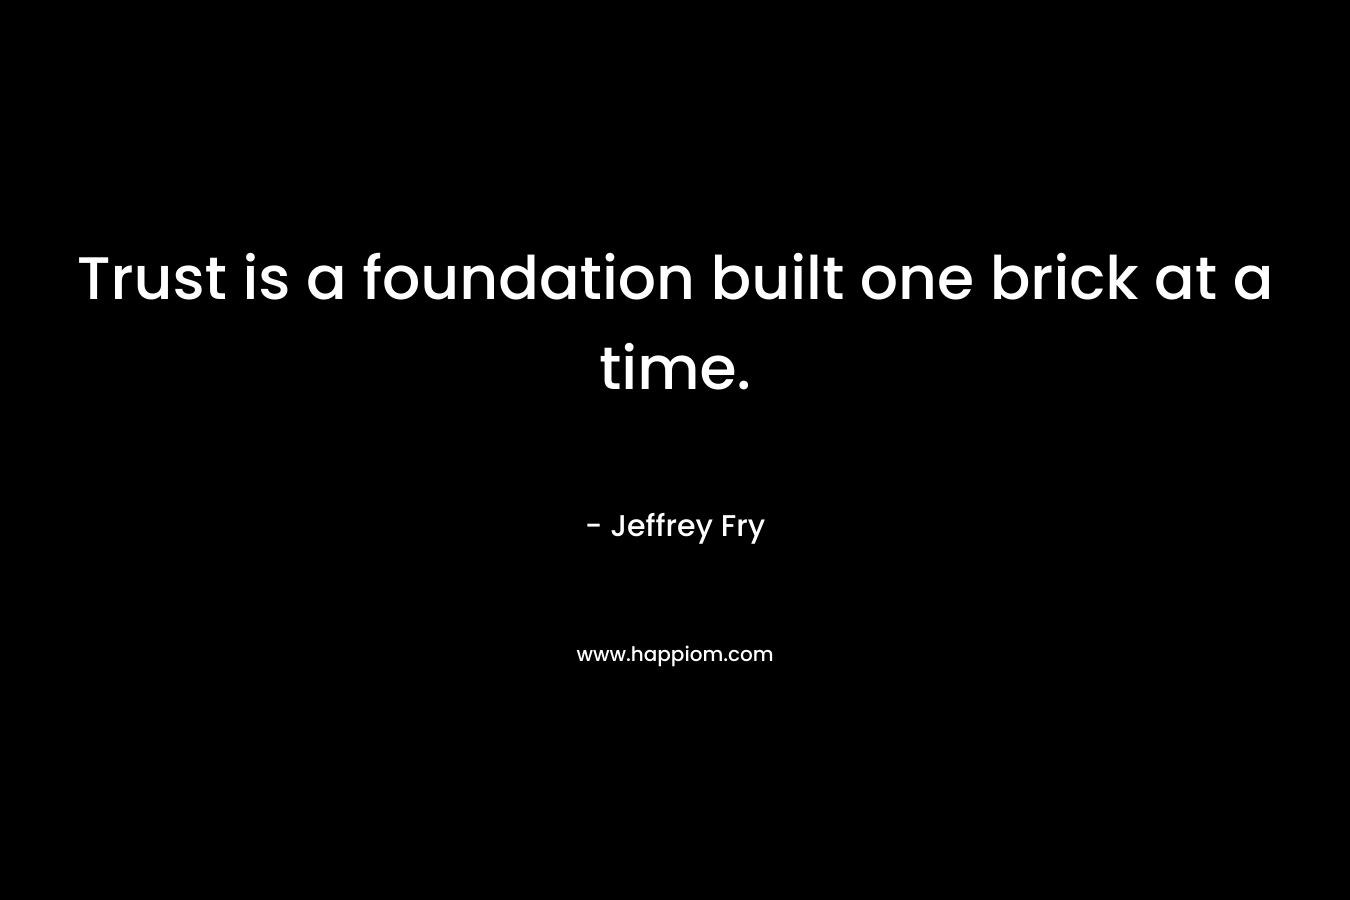 Trust is a foundation built one brick at a time.